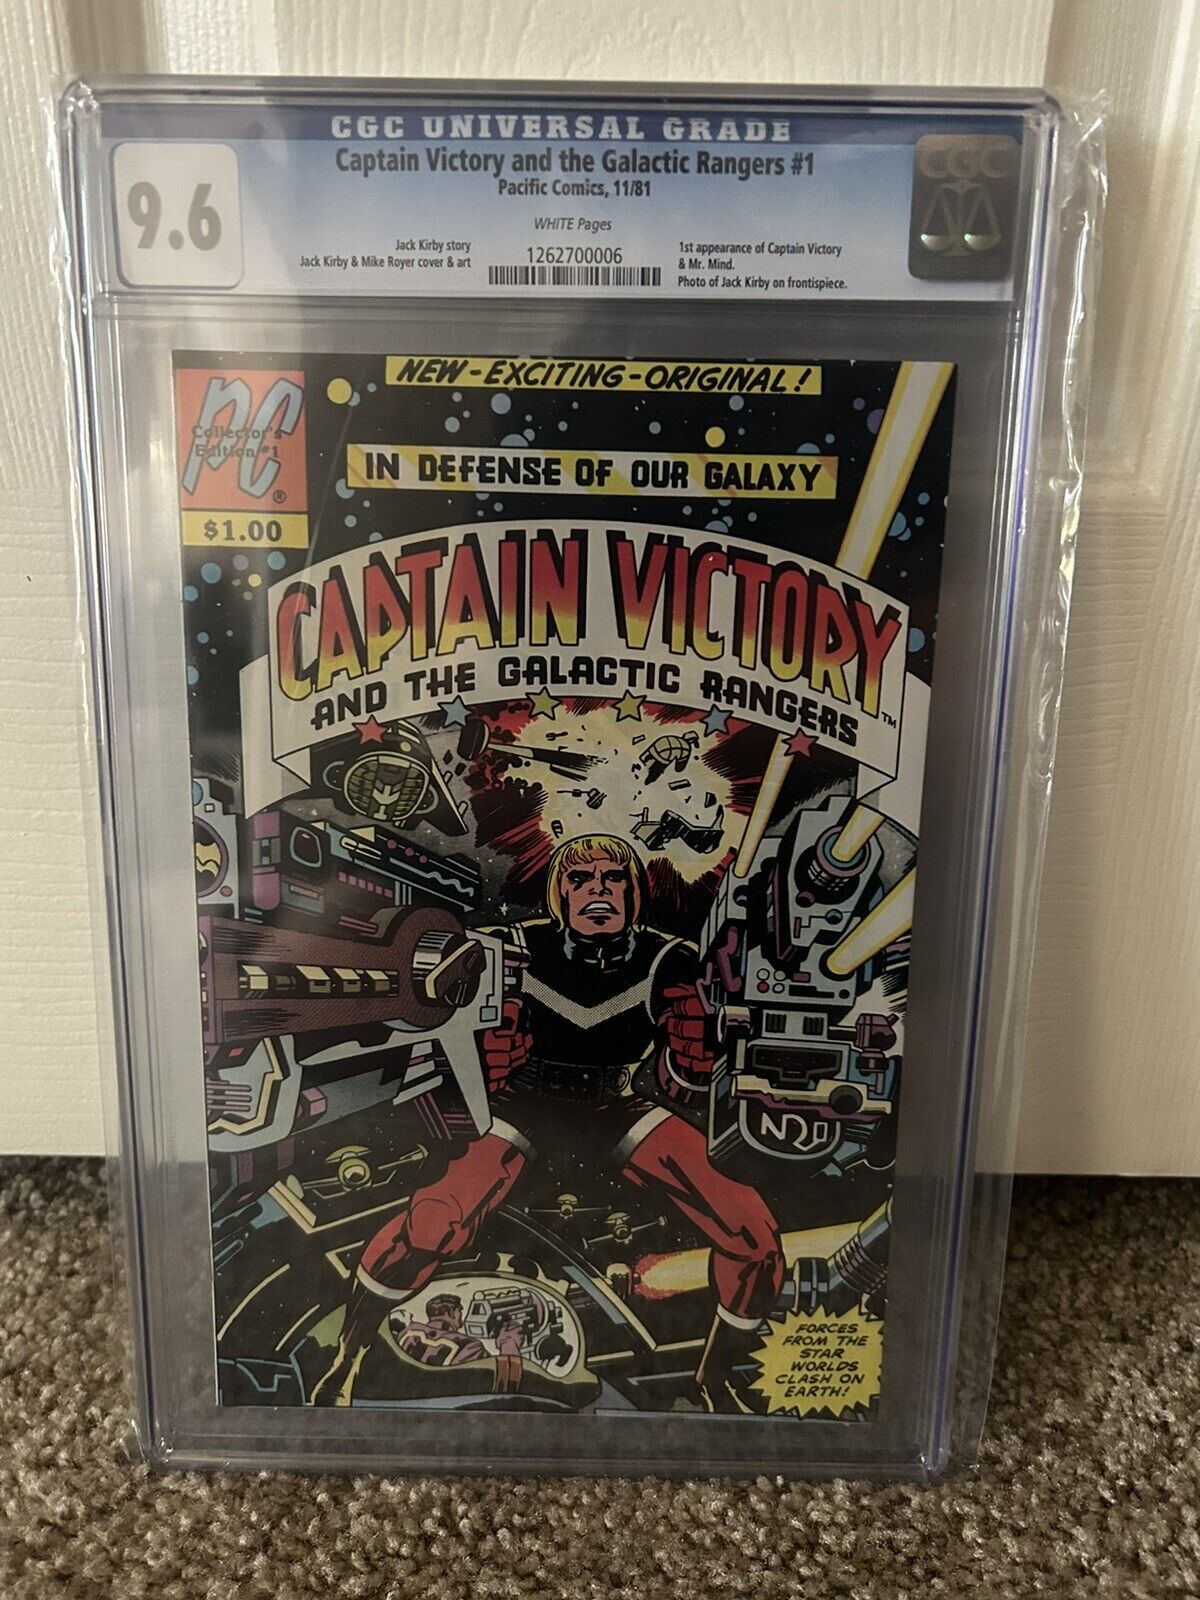 Captain Victory And the Galactic Rangers #1 CGC 9.6 1981 PC Jack Kirby Cover,Art